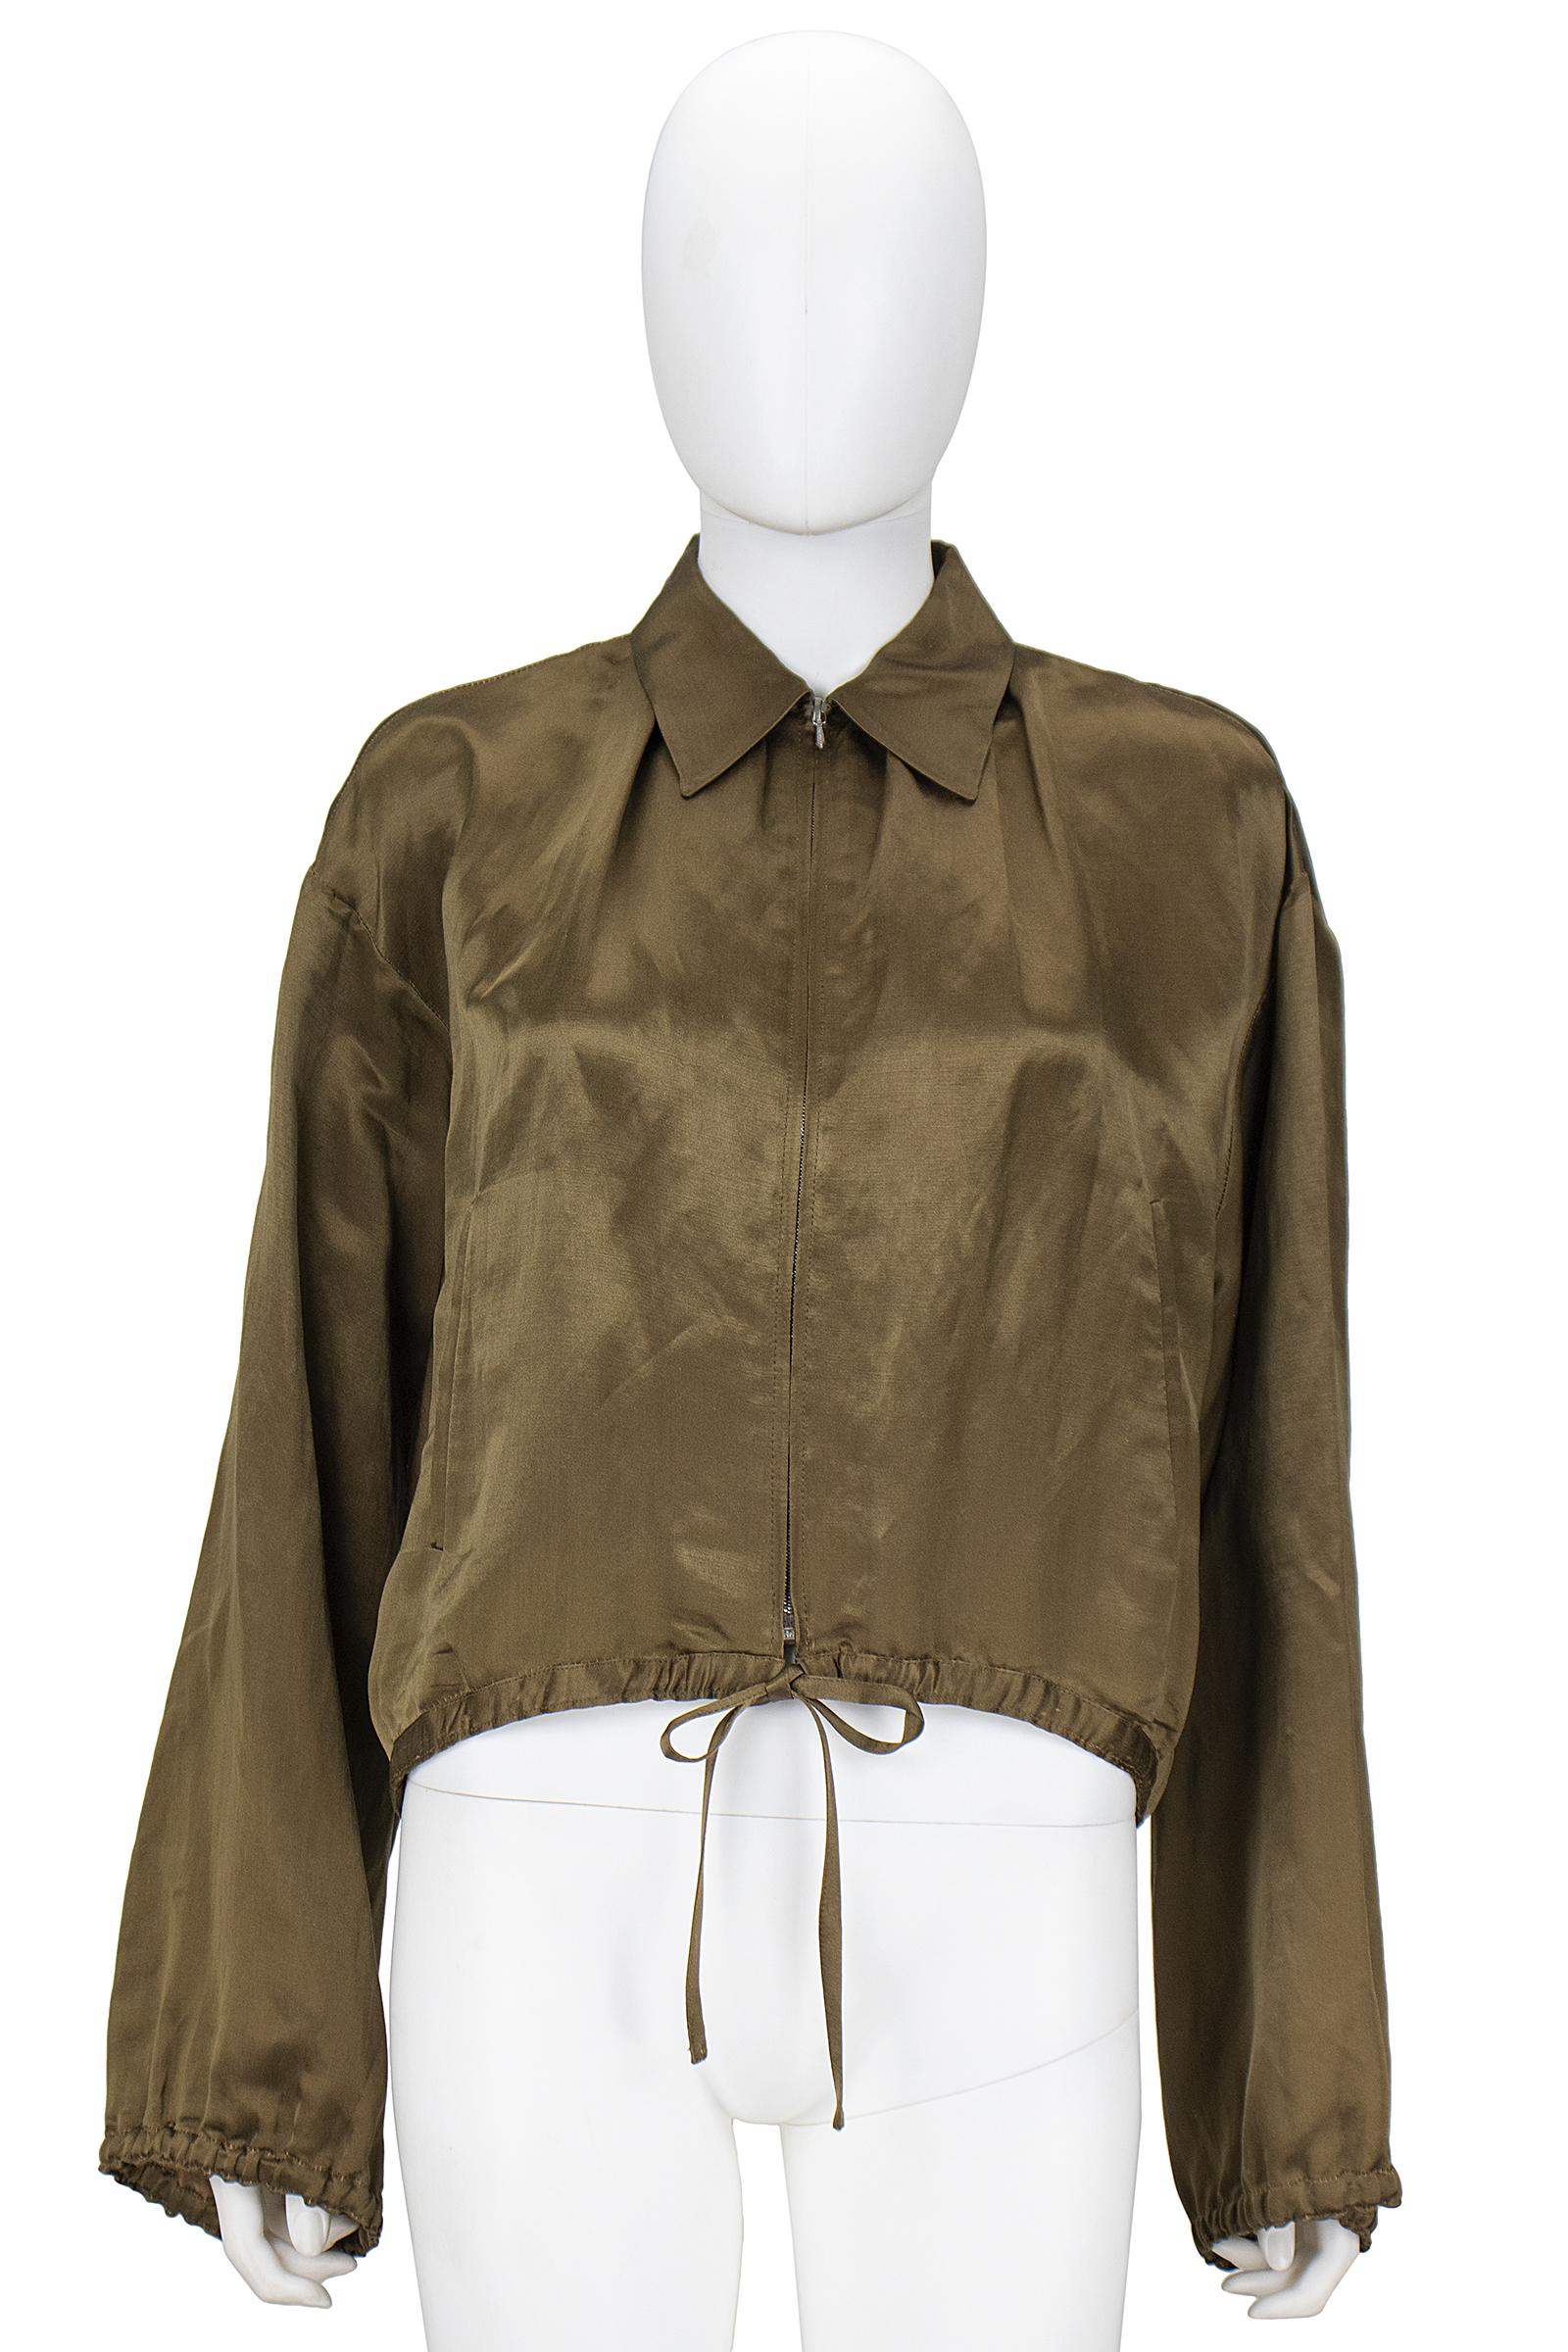 Jean Paul Gaultier crop bomber jacket
Olive silk lined in linen 
Gathering details 
Silver zipper closure with tie at waist 
Size 10 
Made in Italy 

*Please feel free to contact us with the 